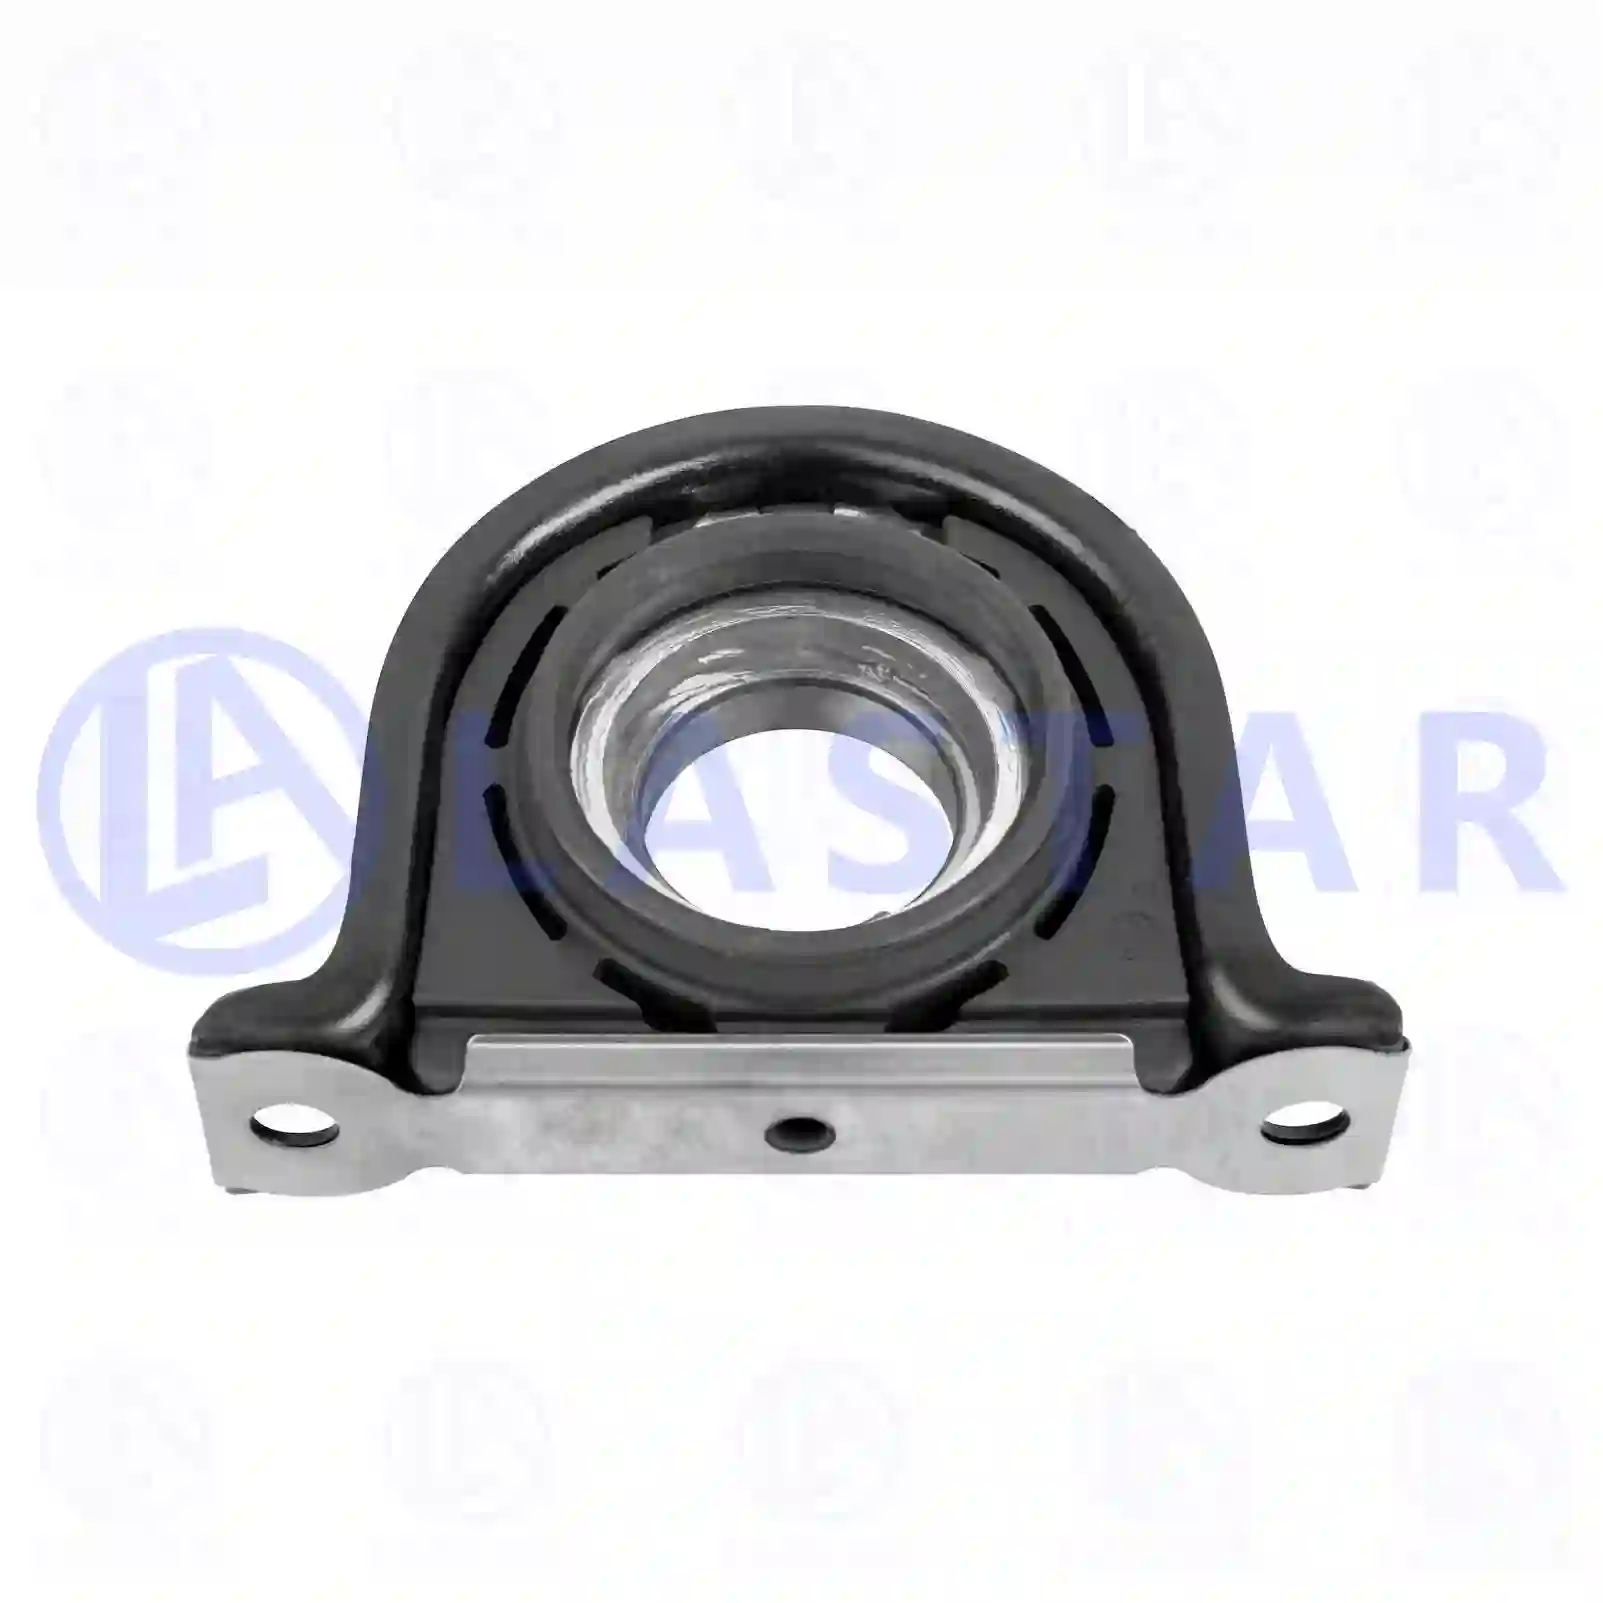 Support Bearing Center bearing, la no: 77734353 ,  oem no:42532291, 4253836 Lastar Spare Part | Truck Spare Parts, Auotomotive Spare Parts